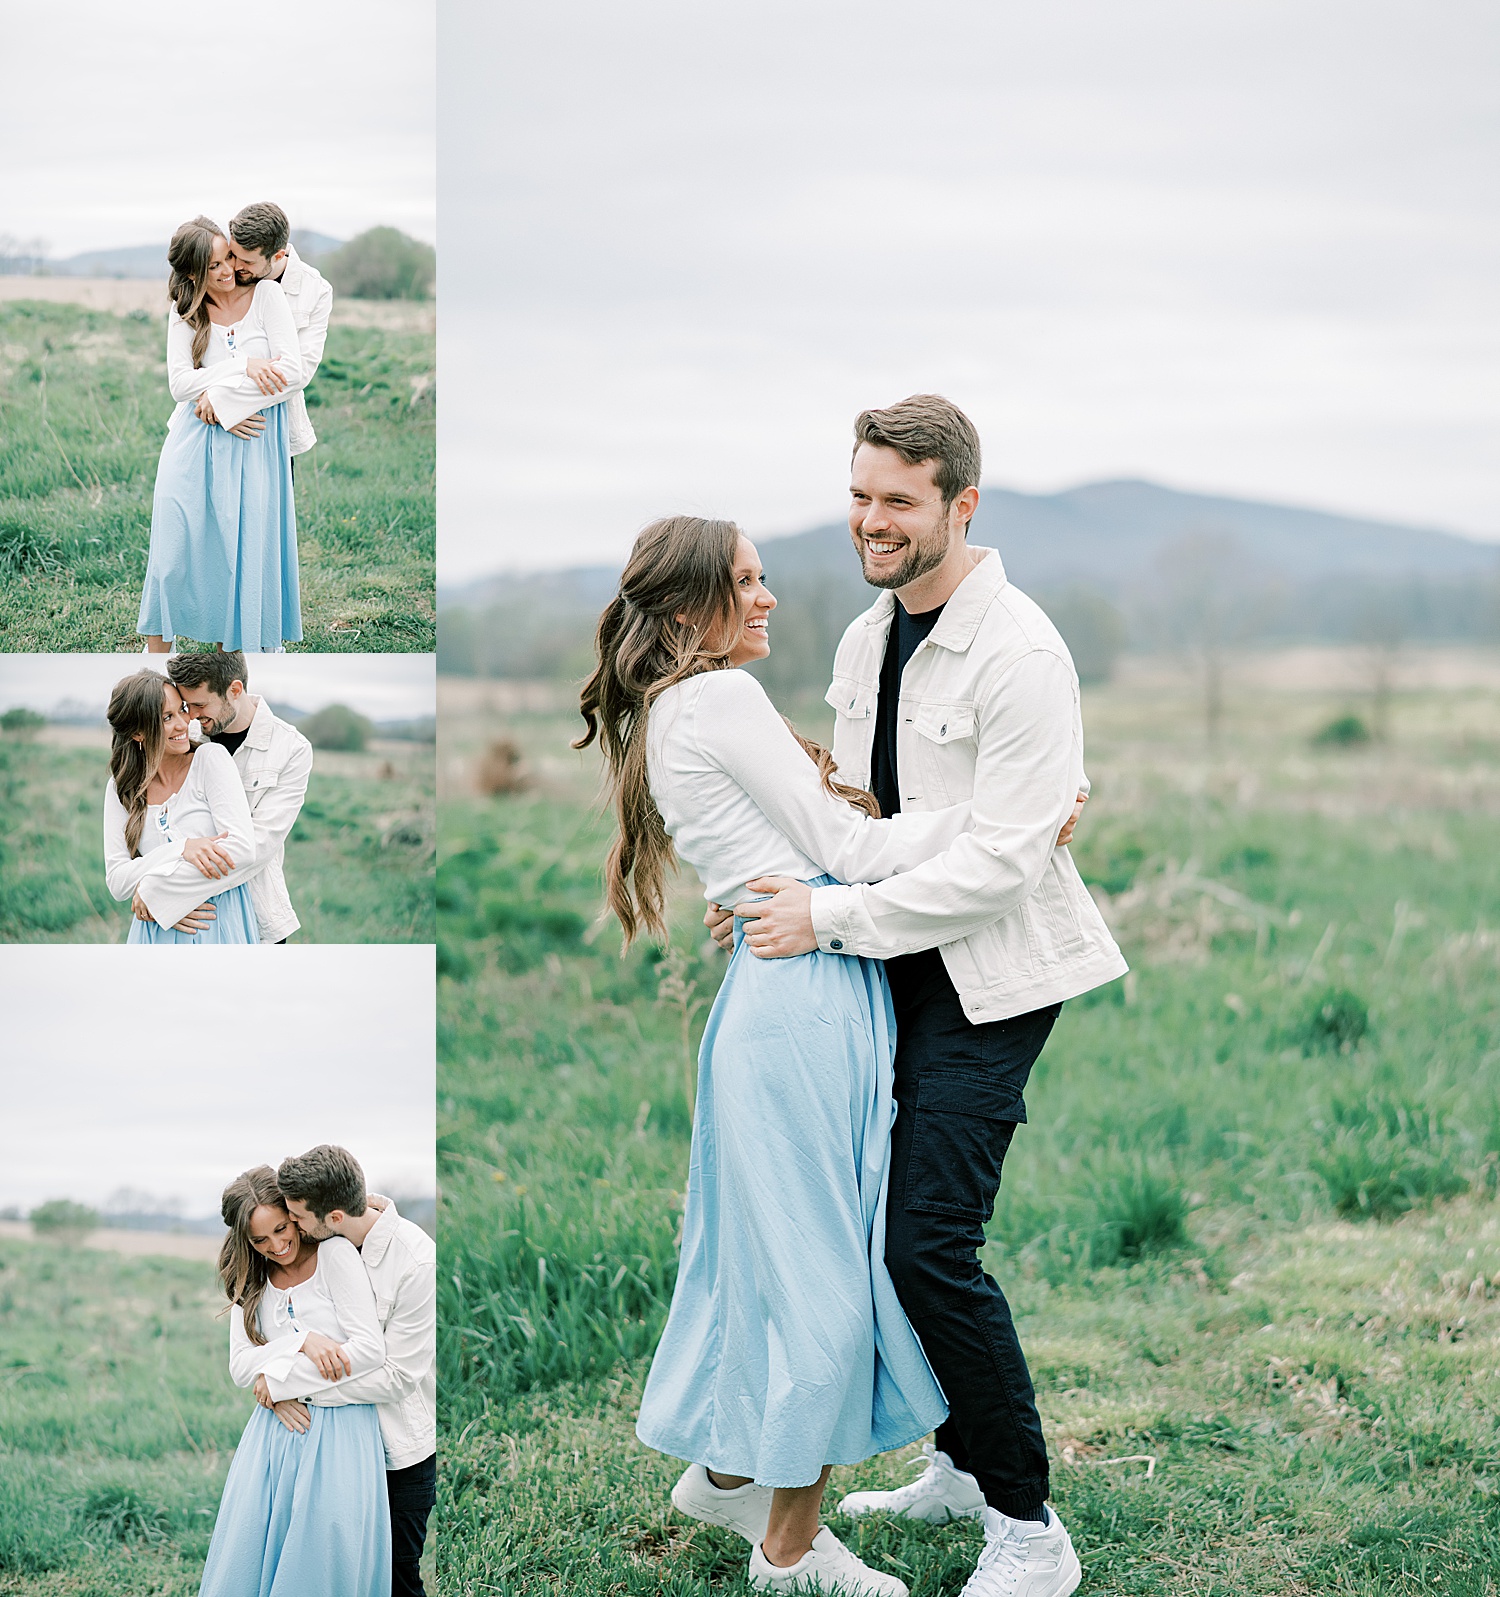 running in the fields during engagement session with Pennsylvania engagement photographer 